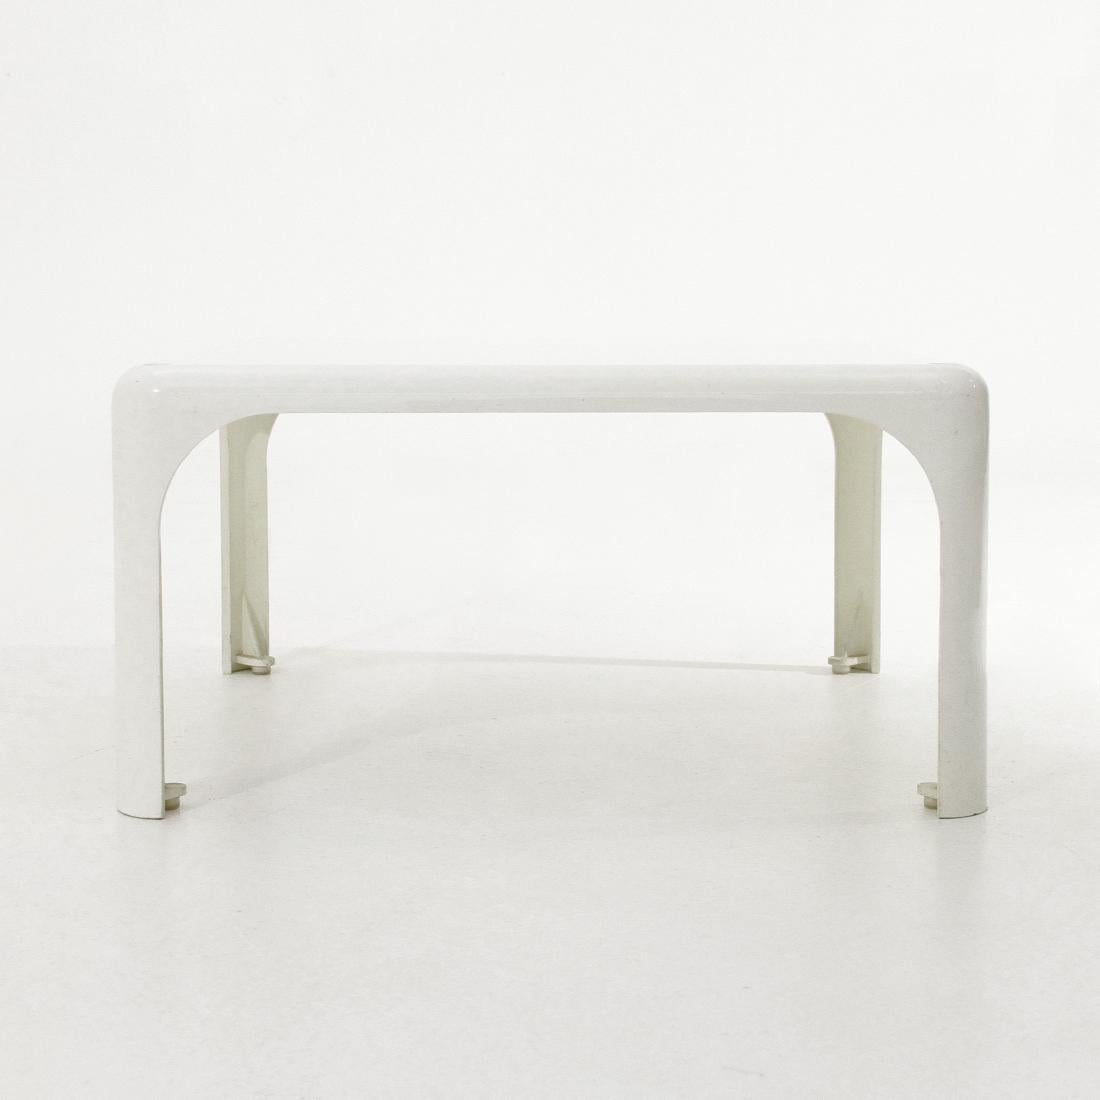 Coffee table produced by Artemide in the 1960s based on a design by Vico Magistretti.
Plastic structure.
Structure in good condition, some marks and scratches.

Dimensions: Length 45 cm, depth 45 cm, height 24 cm.
 